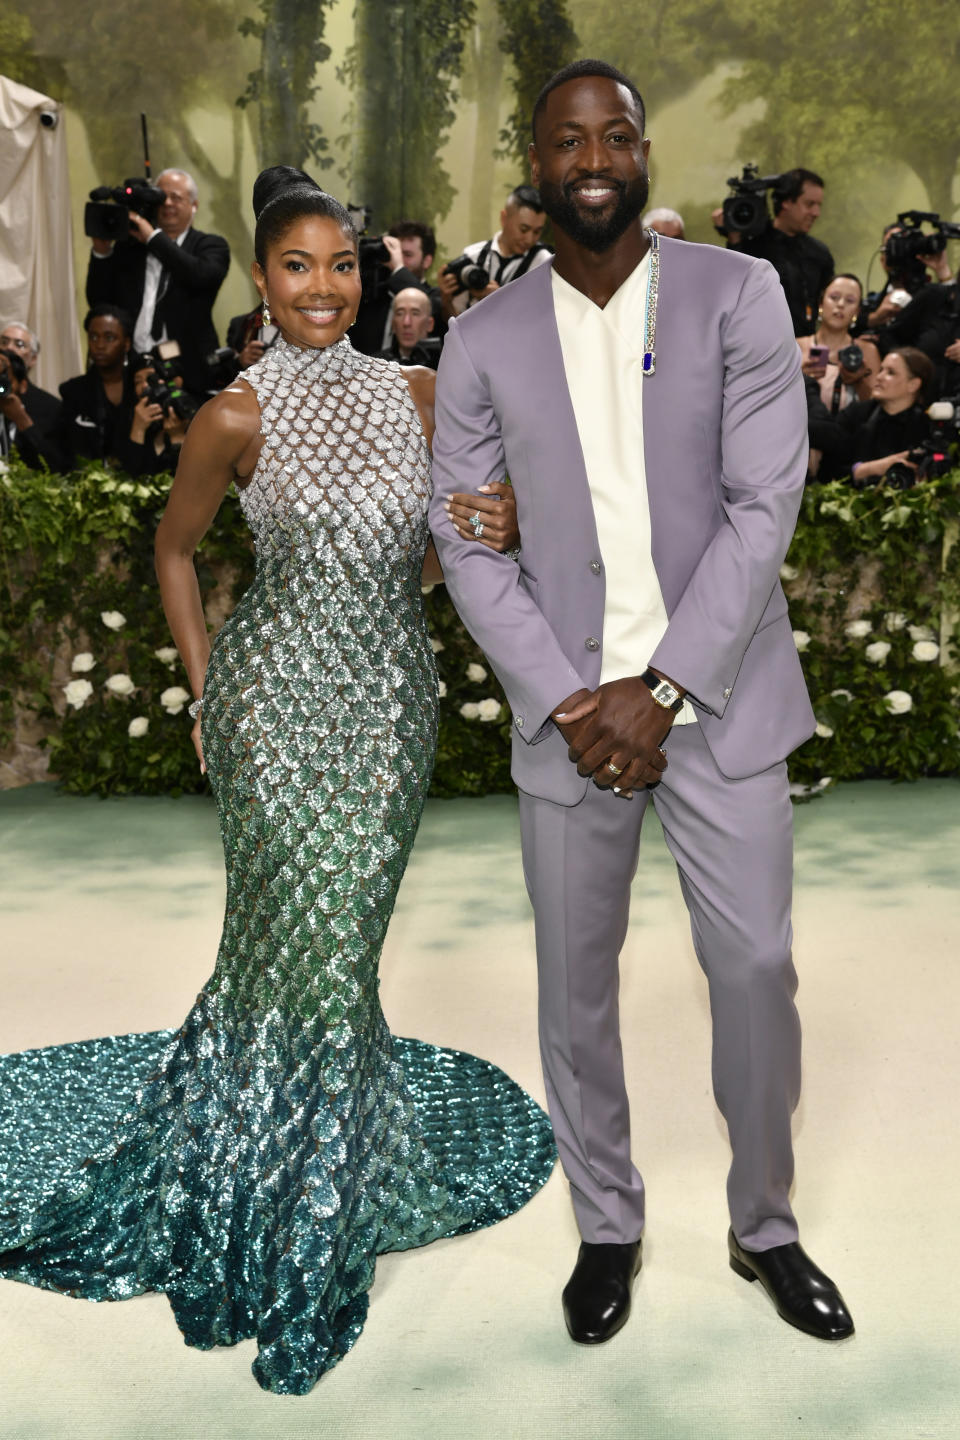 Gabrielle Union, left, and Dwyane Wade attend The Metropolitan Museum of Art's Costume Institute benefit gala celebrating the opening of the 